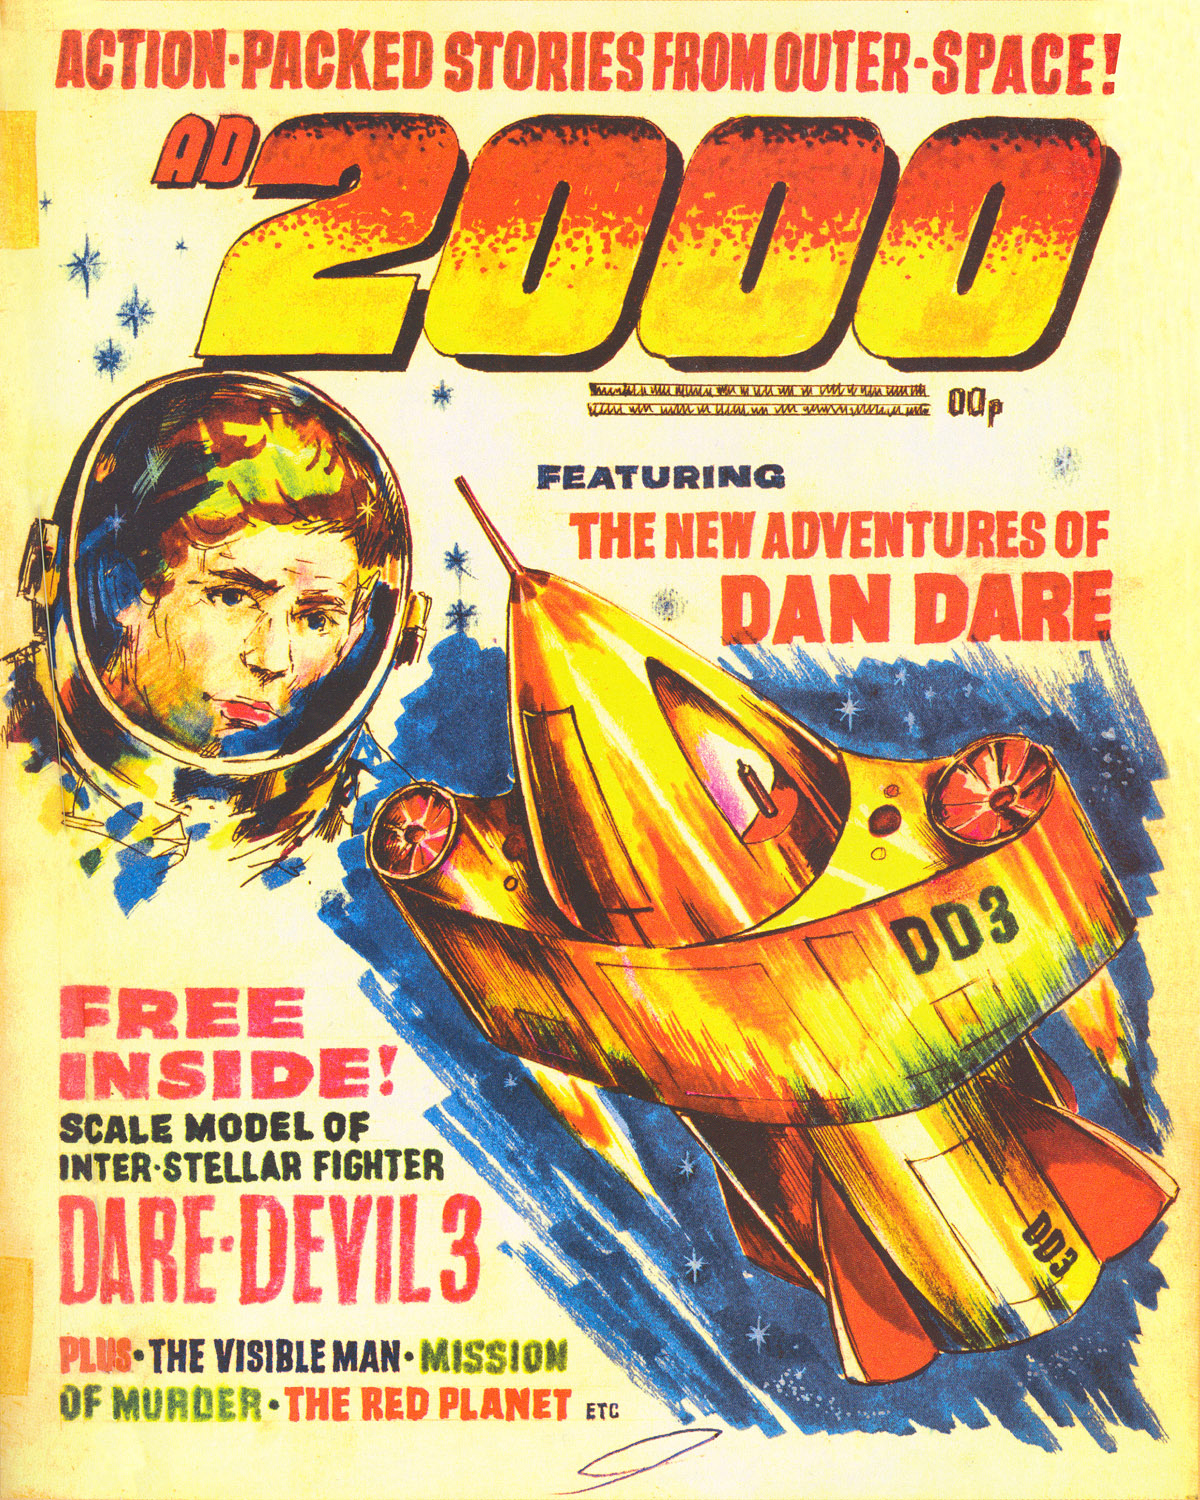 An early dummy cover for "AD2000", cover artist unknown